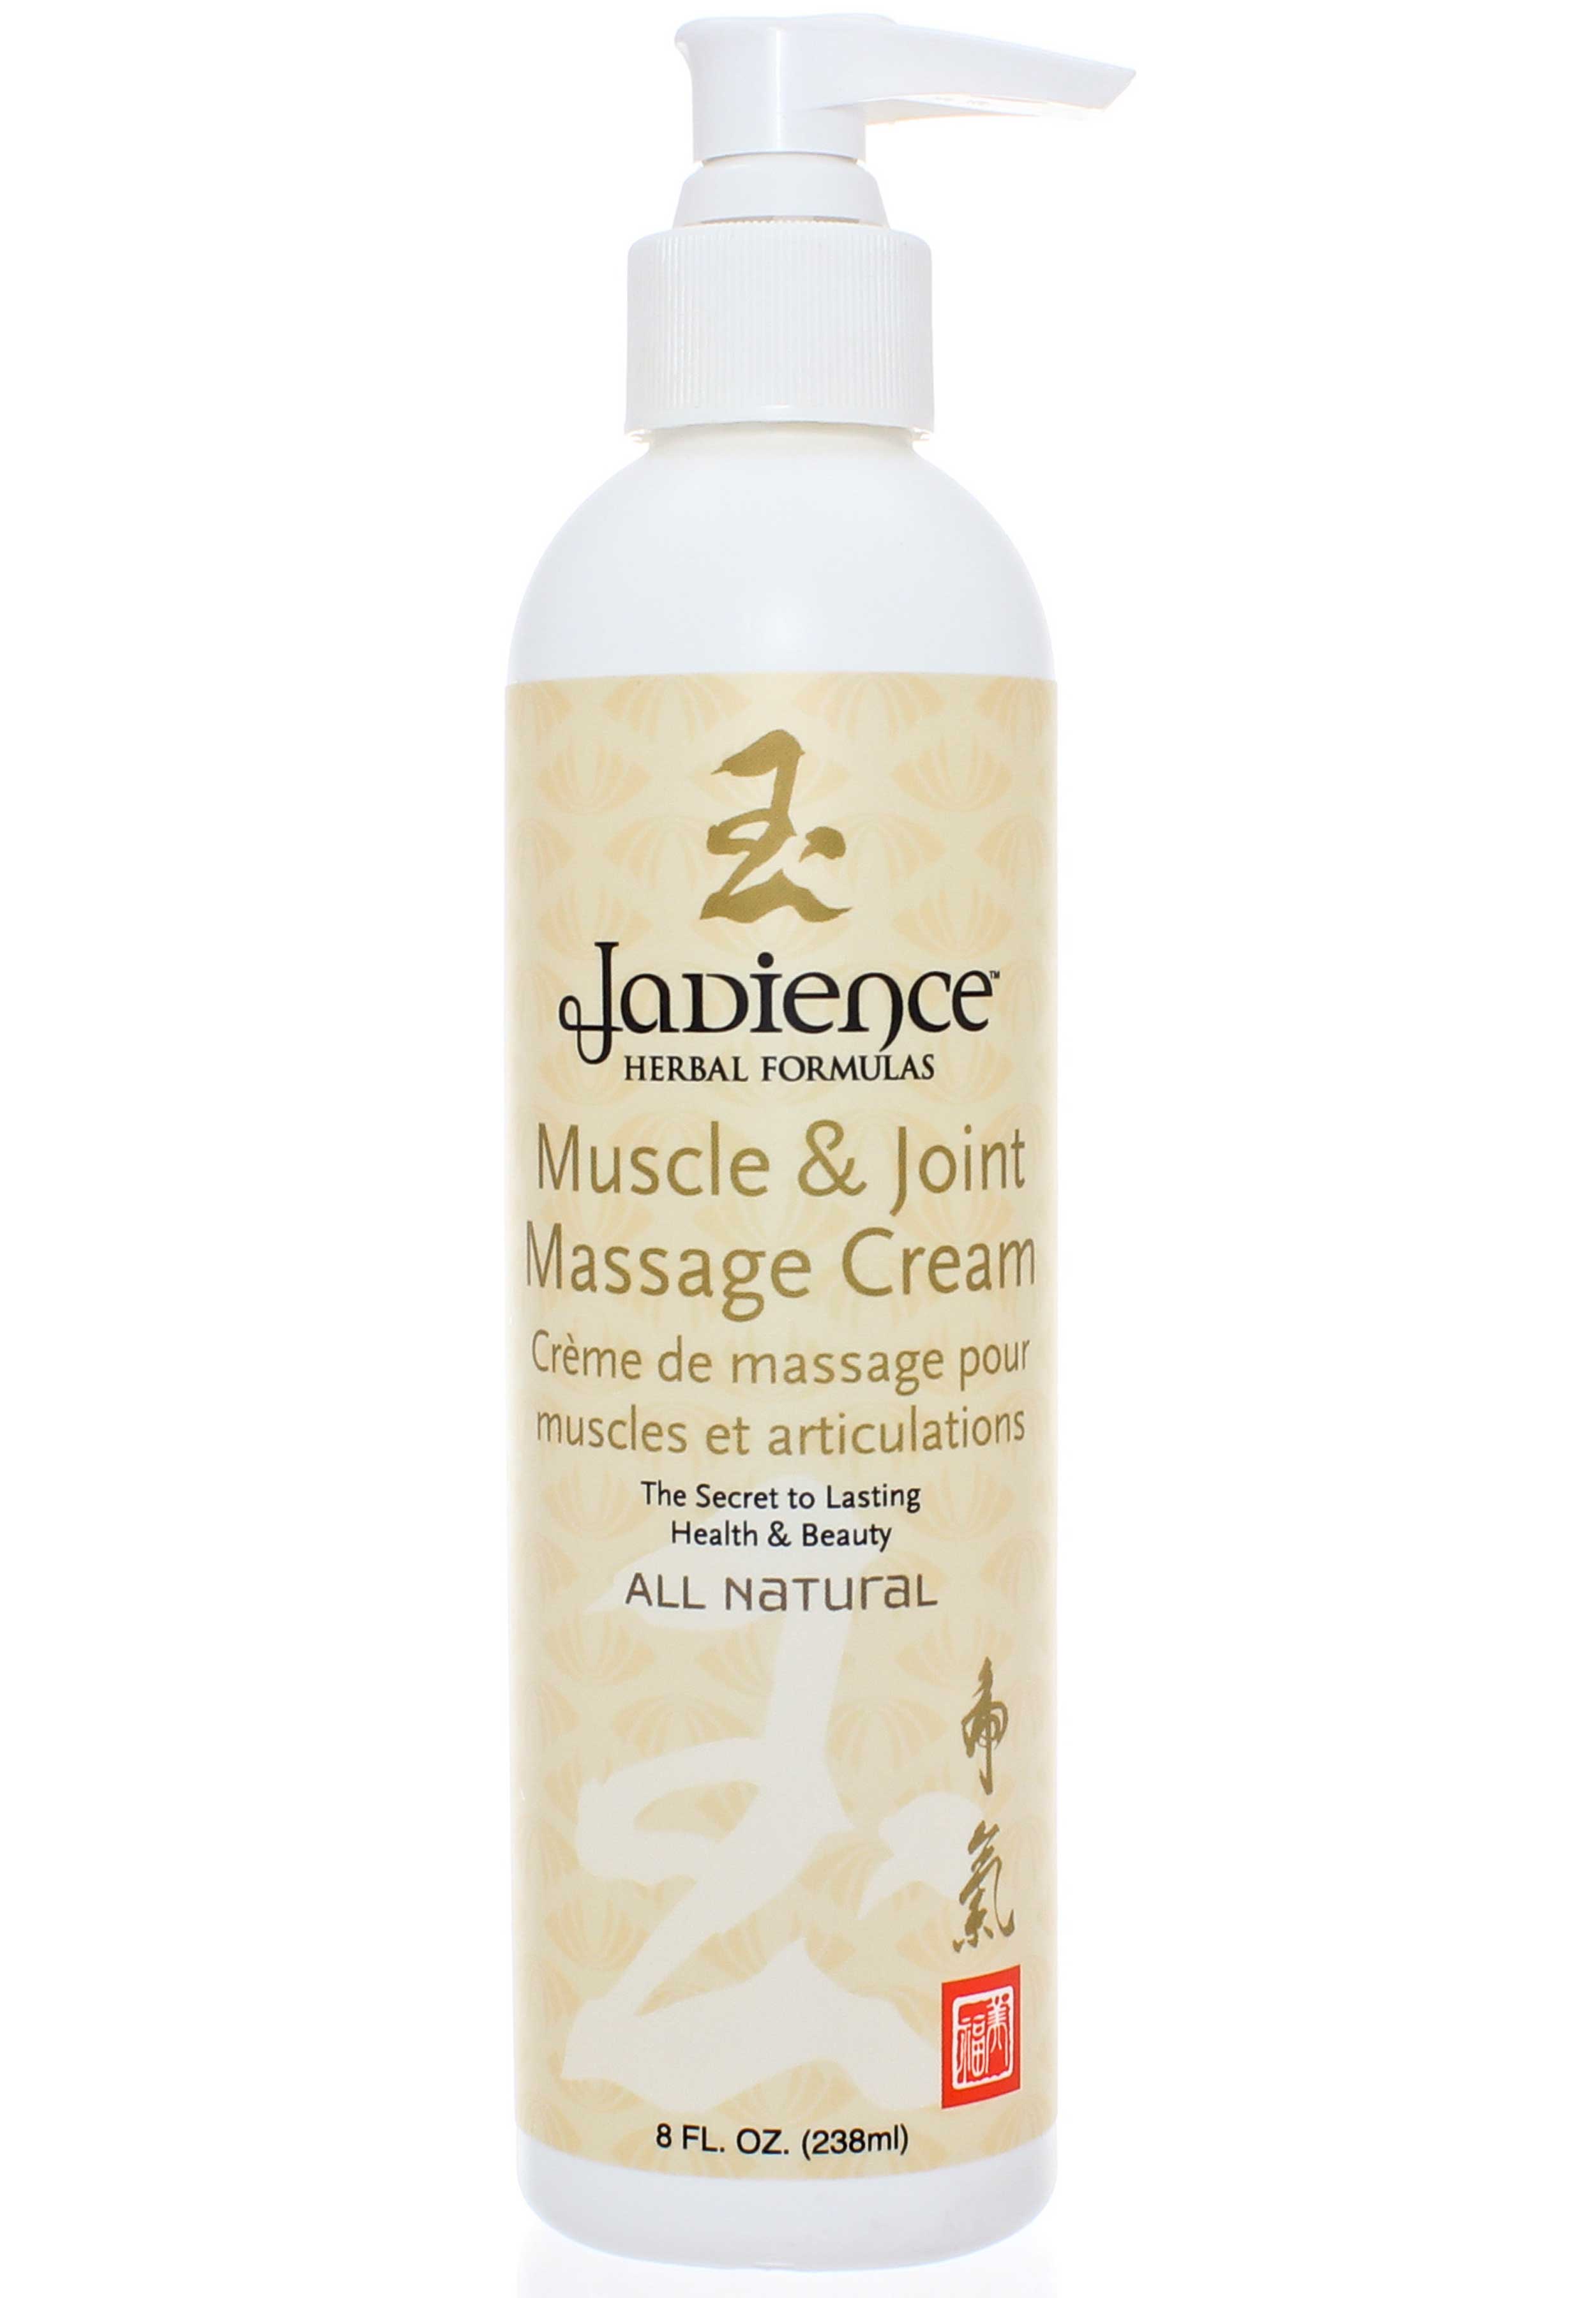 Jadience Herbal Formulas Muscle and Joint Massage Cream 